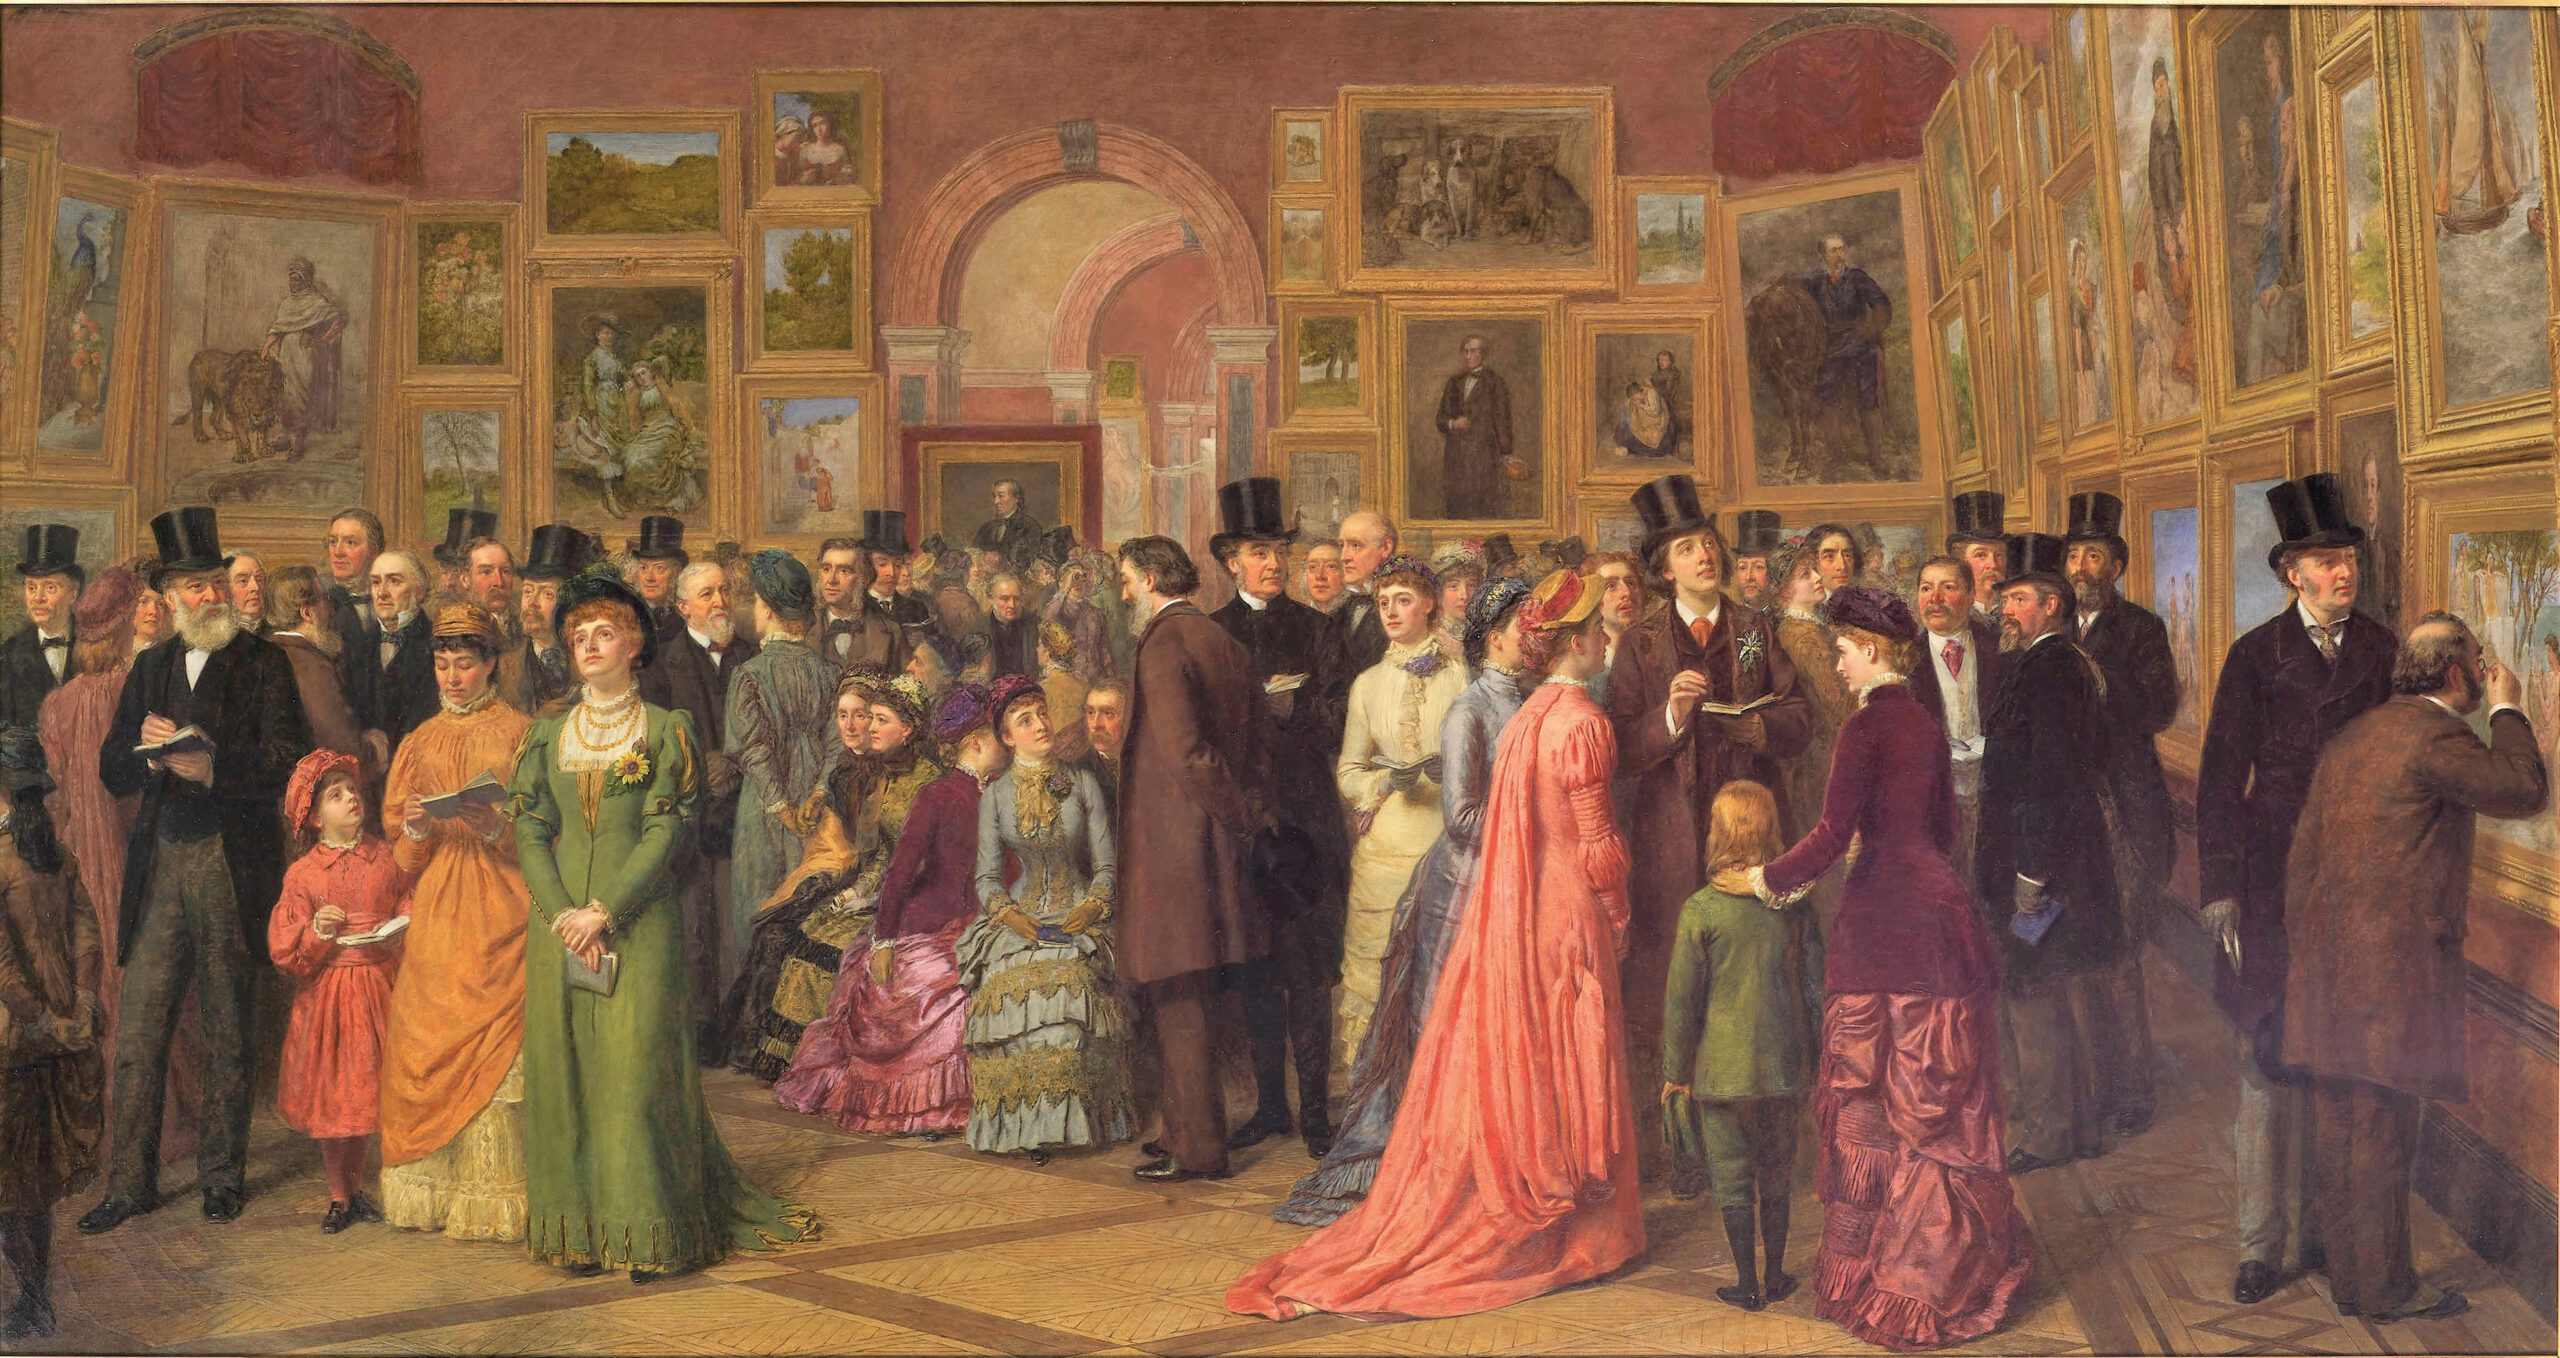 William Powell Frith (1819–1909), "The Private View at the Royal Academy," 1881, 1883, oil on canvas, 40 1/2 x 77 in., private collection